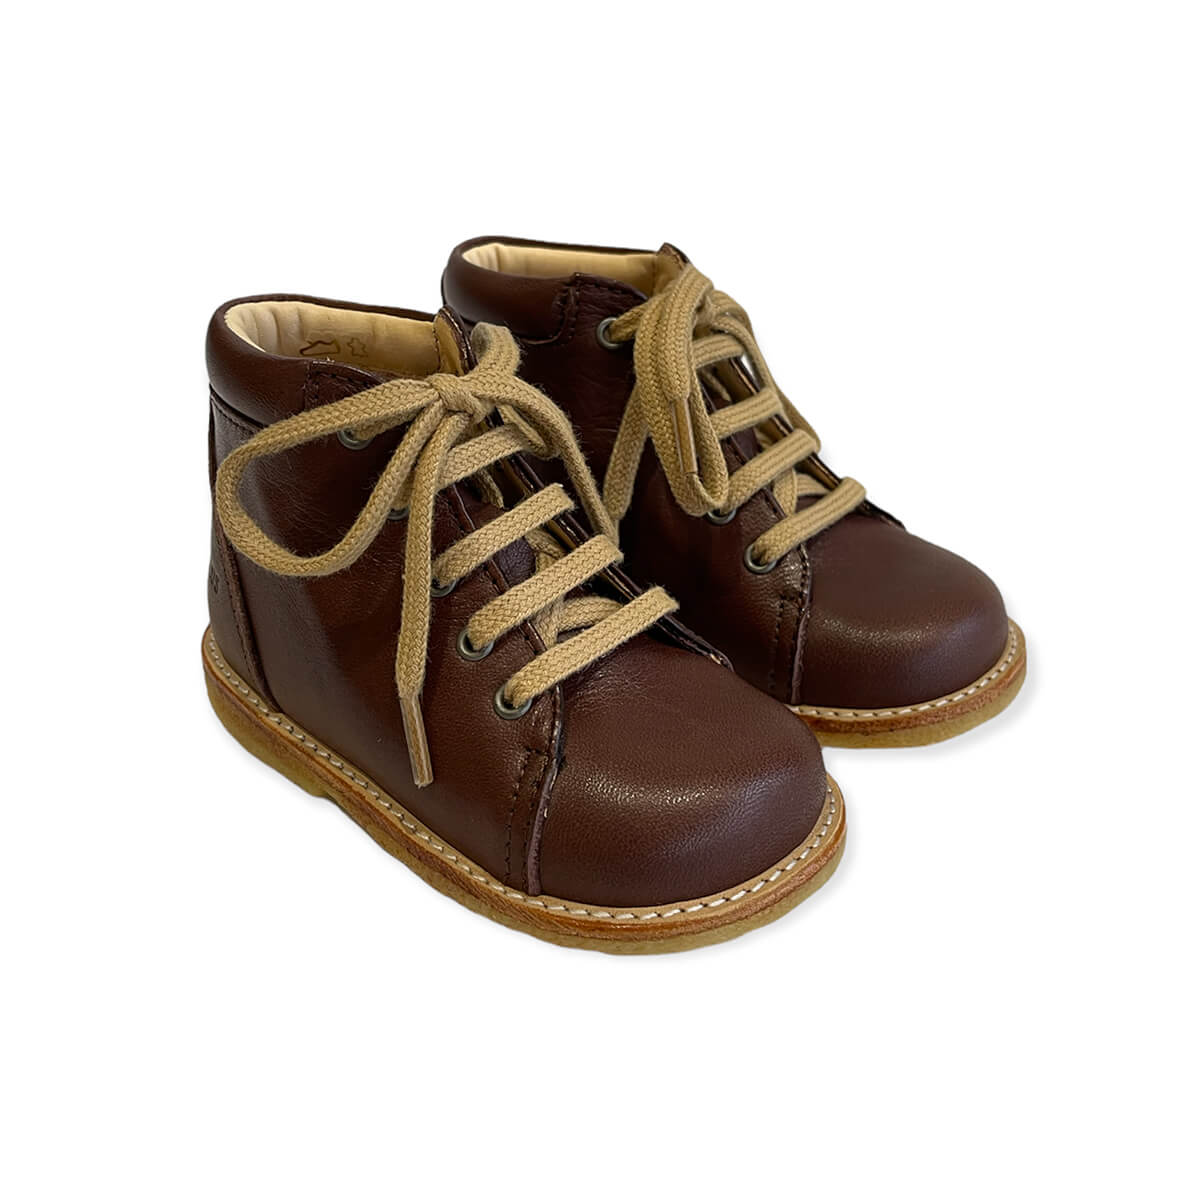 Henstilling Landbrug Brawl Lace Up Starter Boots in Angulus Brown by Angulus – Junior Edition